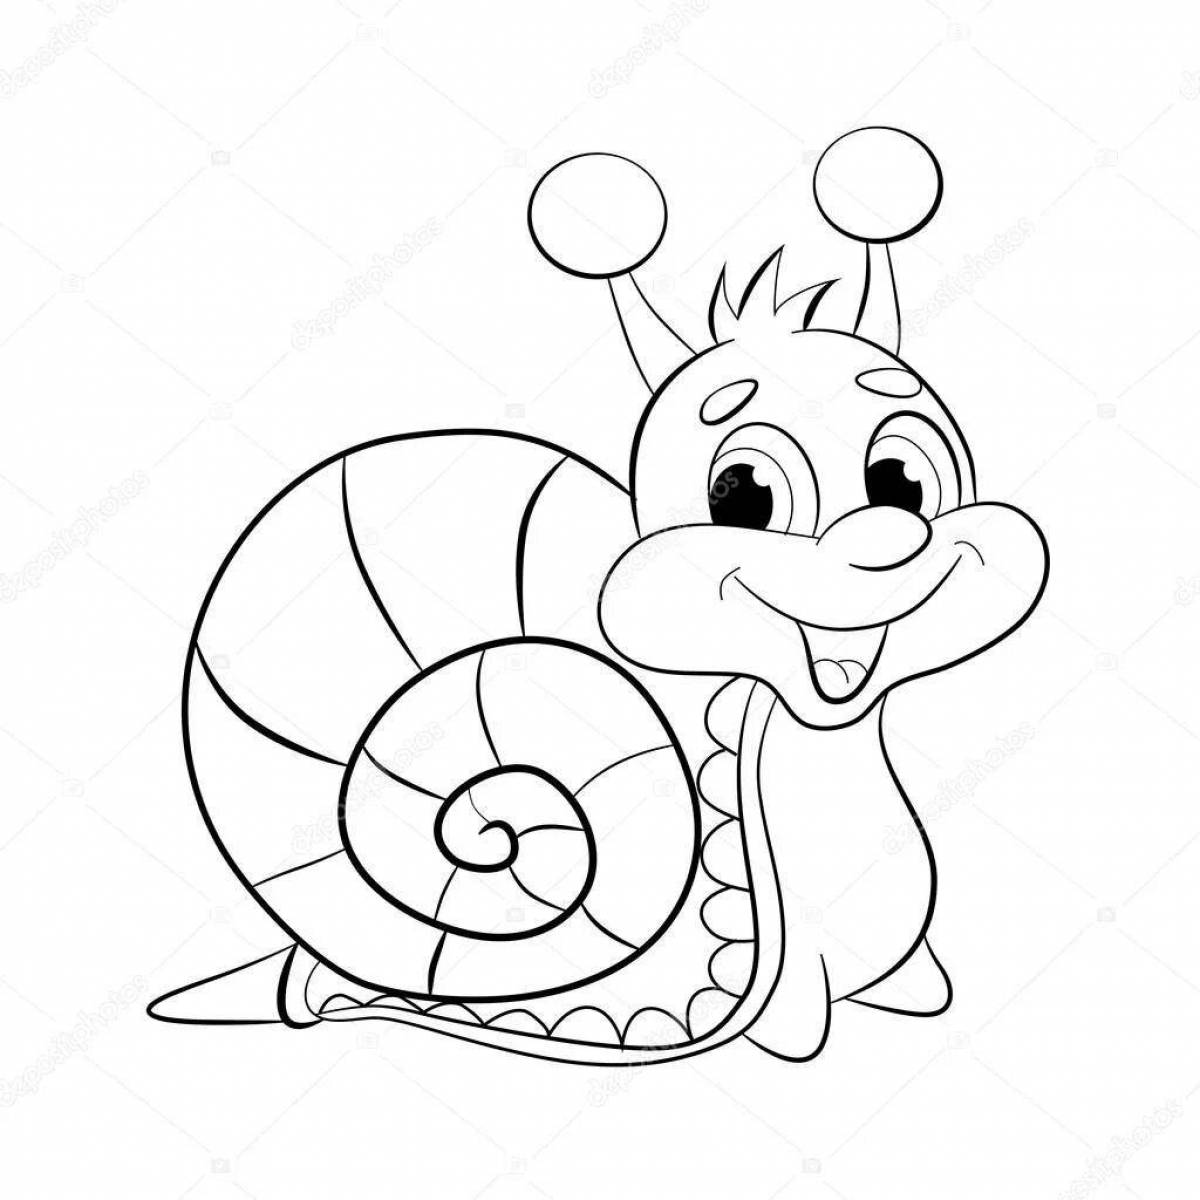 A wonderful snail coloring book for children 5-6 years old